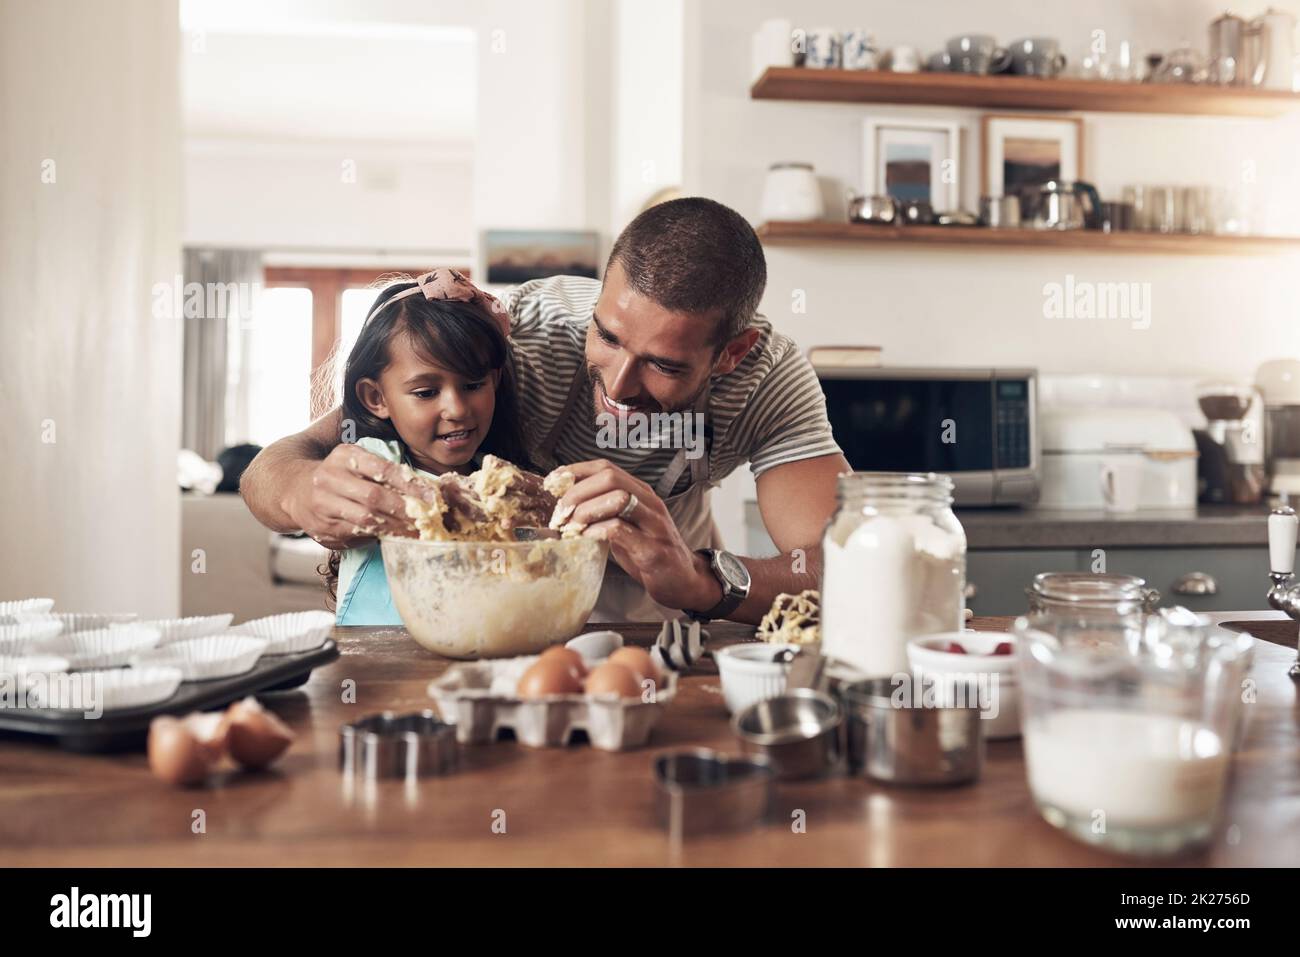 Family love is messy. Shot of a father teaching his daughter how to bake in the kitchen at home. Stock Photo